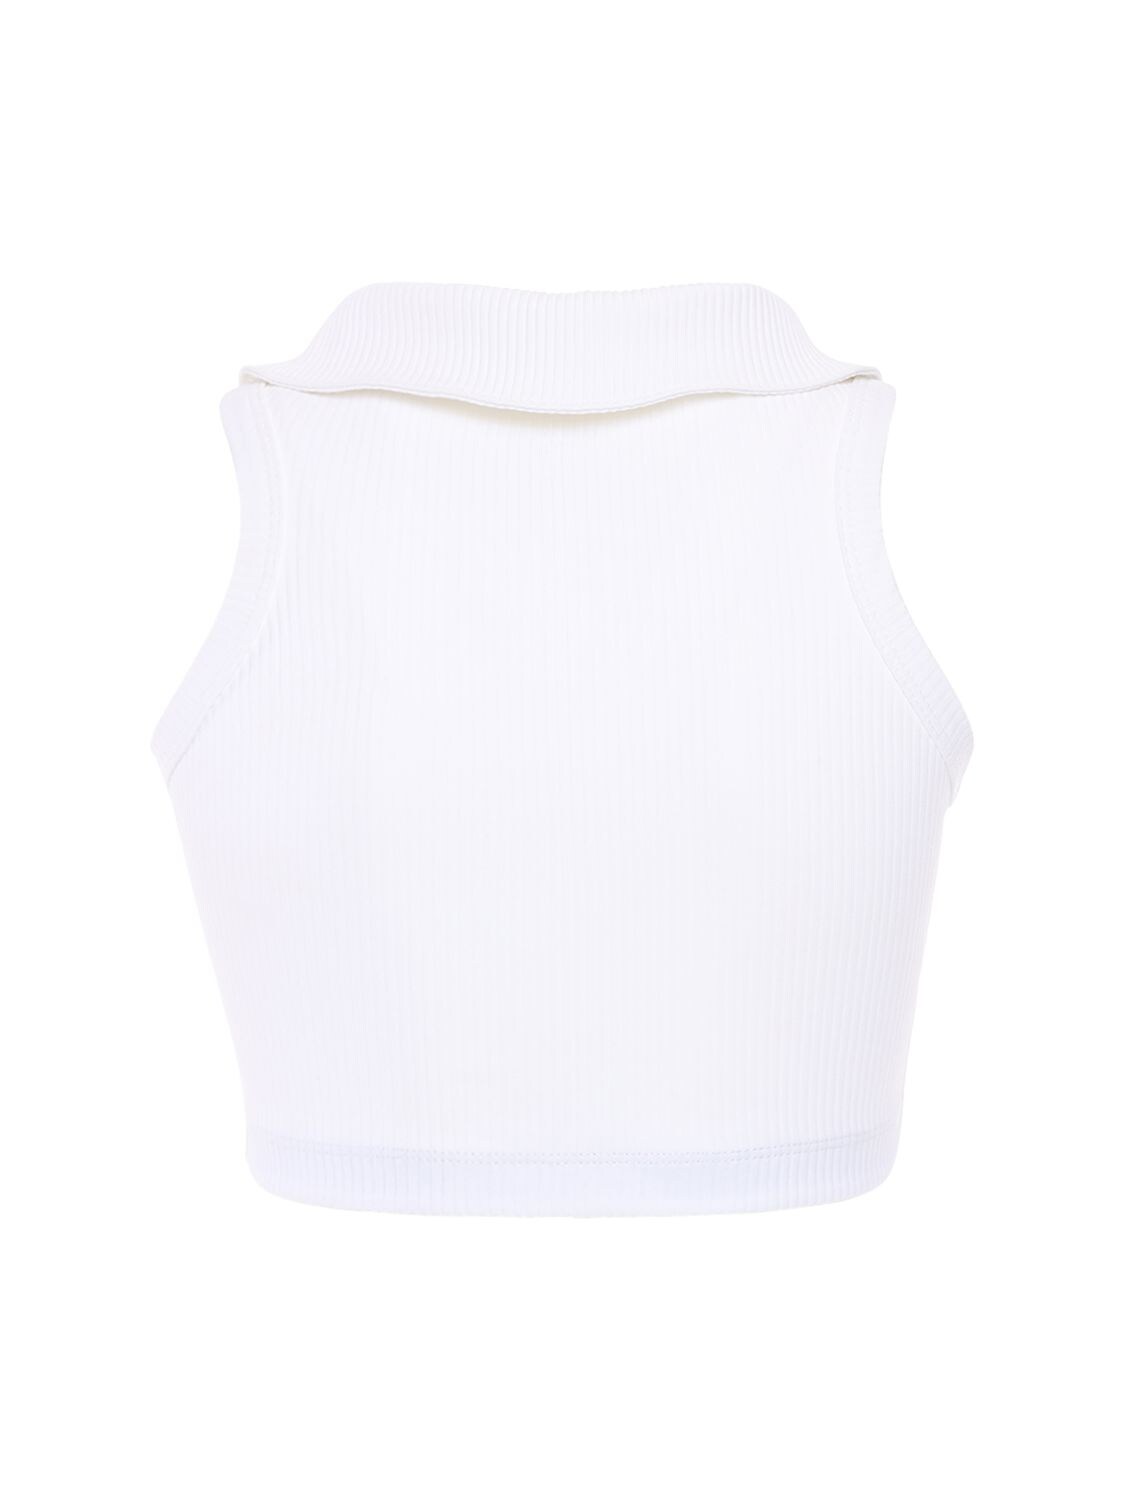 YEAR OF OURS THE GABRIELA RIBBED BRA TOP